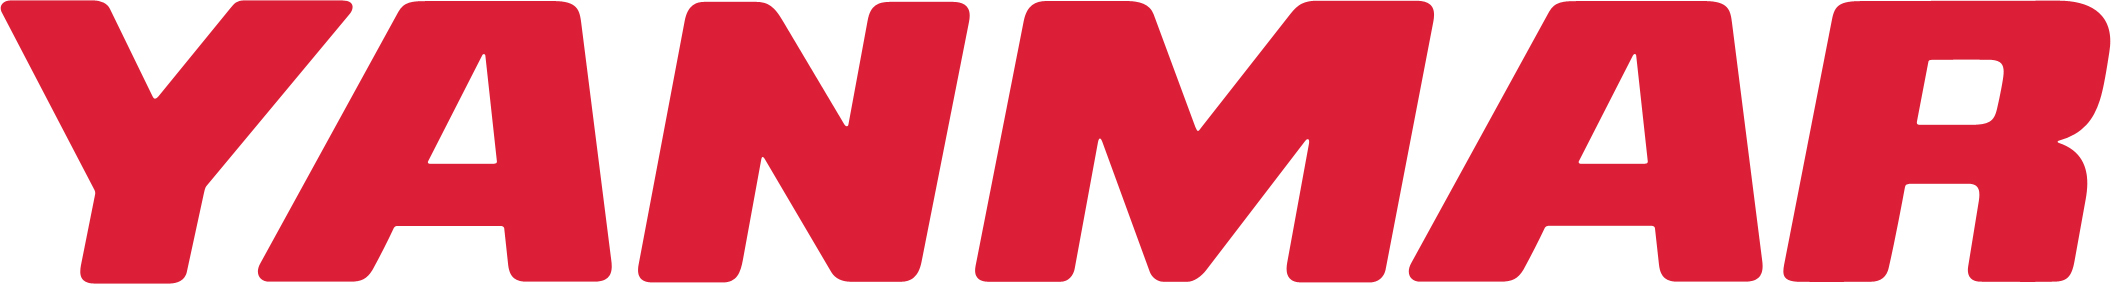 Y_newcolor_logotype.jpg